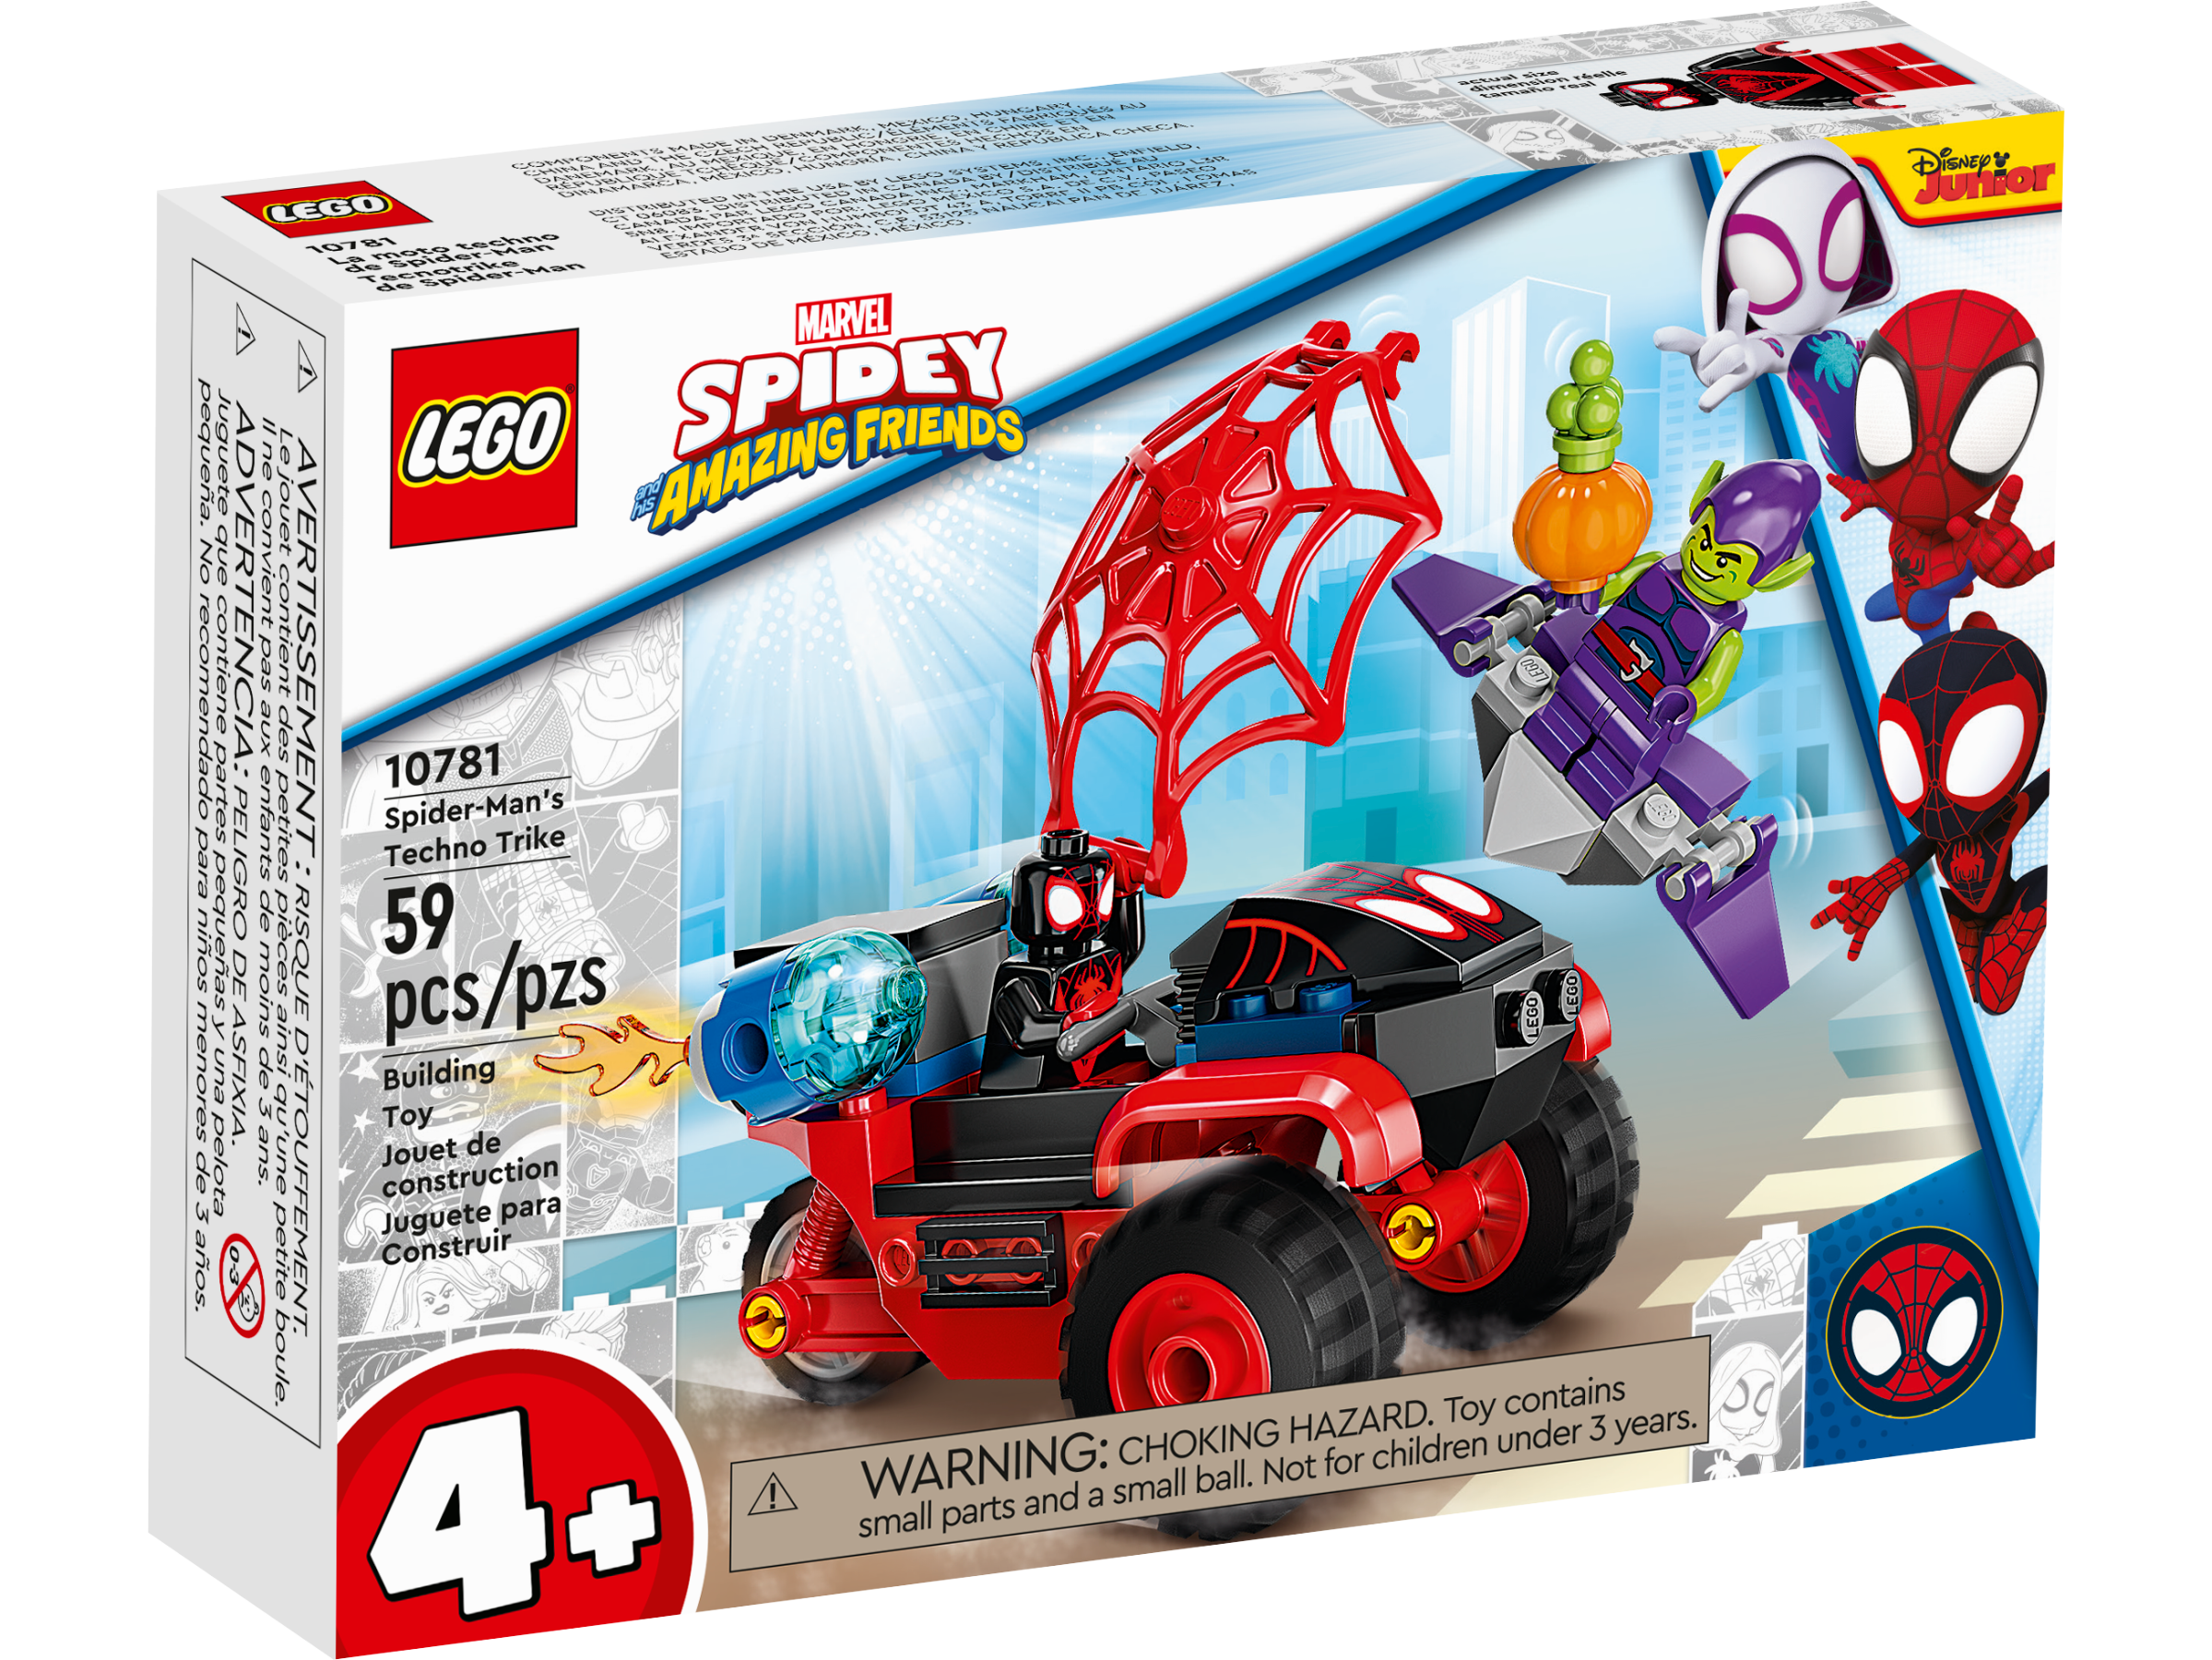 Who Love Super-Hero Play Spider-Man’s Techno Trike 10781 Building Kit; Miles Morales Set Makes a Fun Gift Idea for Kids Aged 4 LEGO Marvel Spidey and His Amazing Friends Miles Morales 59 Pieces 